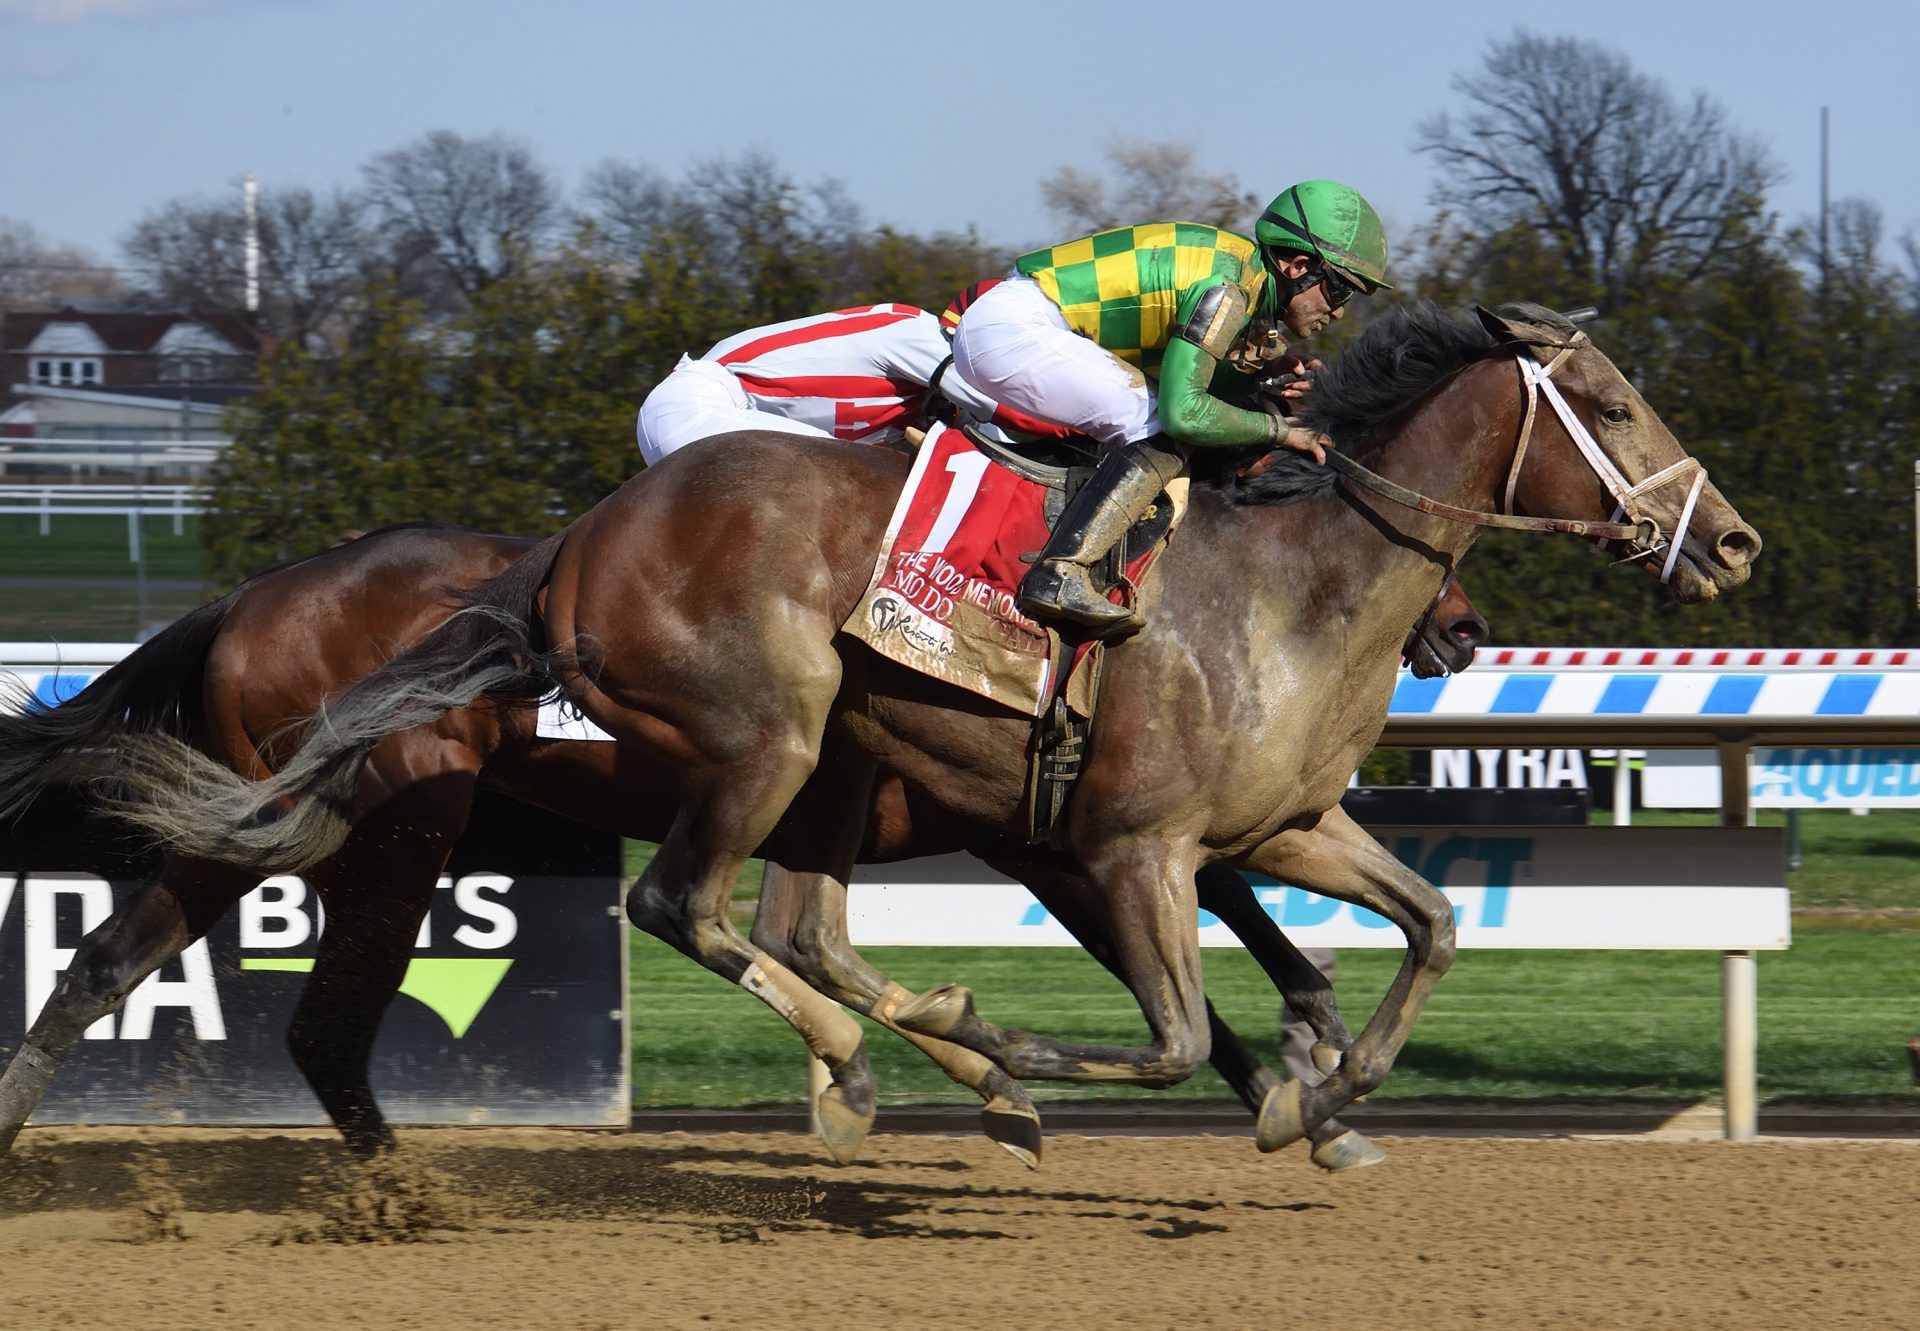 Mo Donegal (Uncle Mo) wins the Gr.2 Wood Memorial at Aqueduct